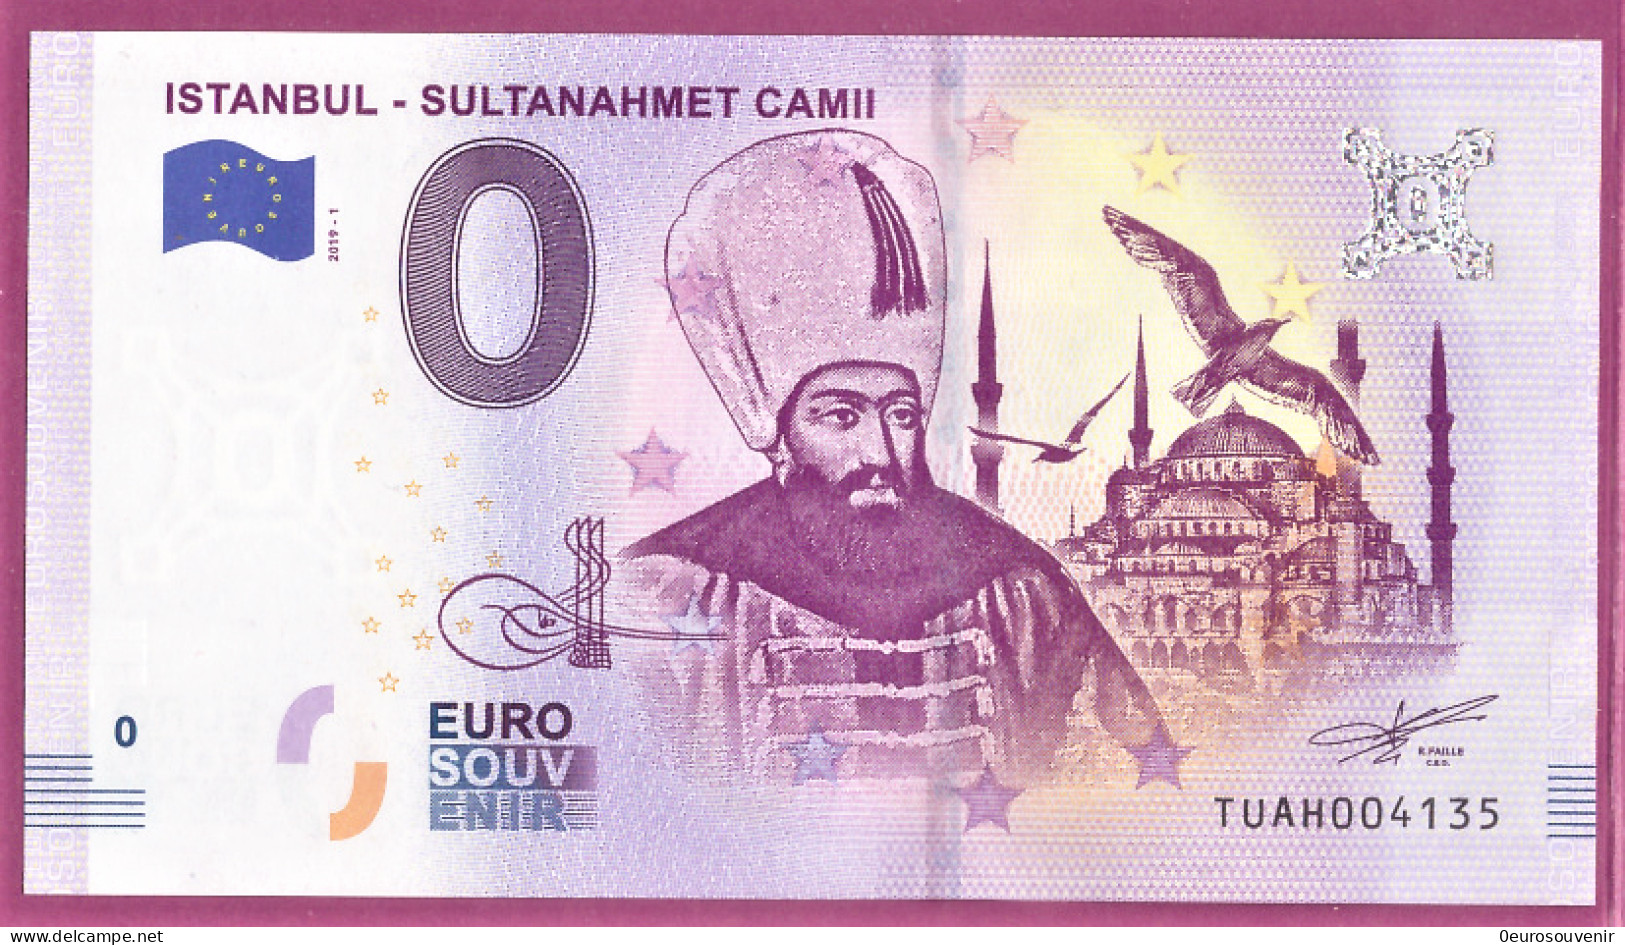 0-Euro TUAH 2019-1 ISTANBUL - SULTANAHMET CAMII - Private Proofs / Unofficial